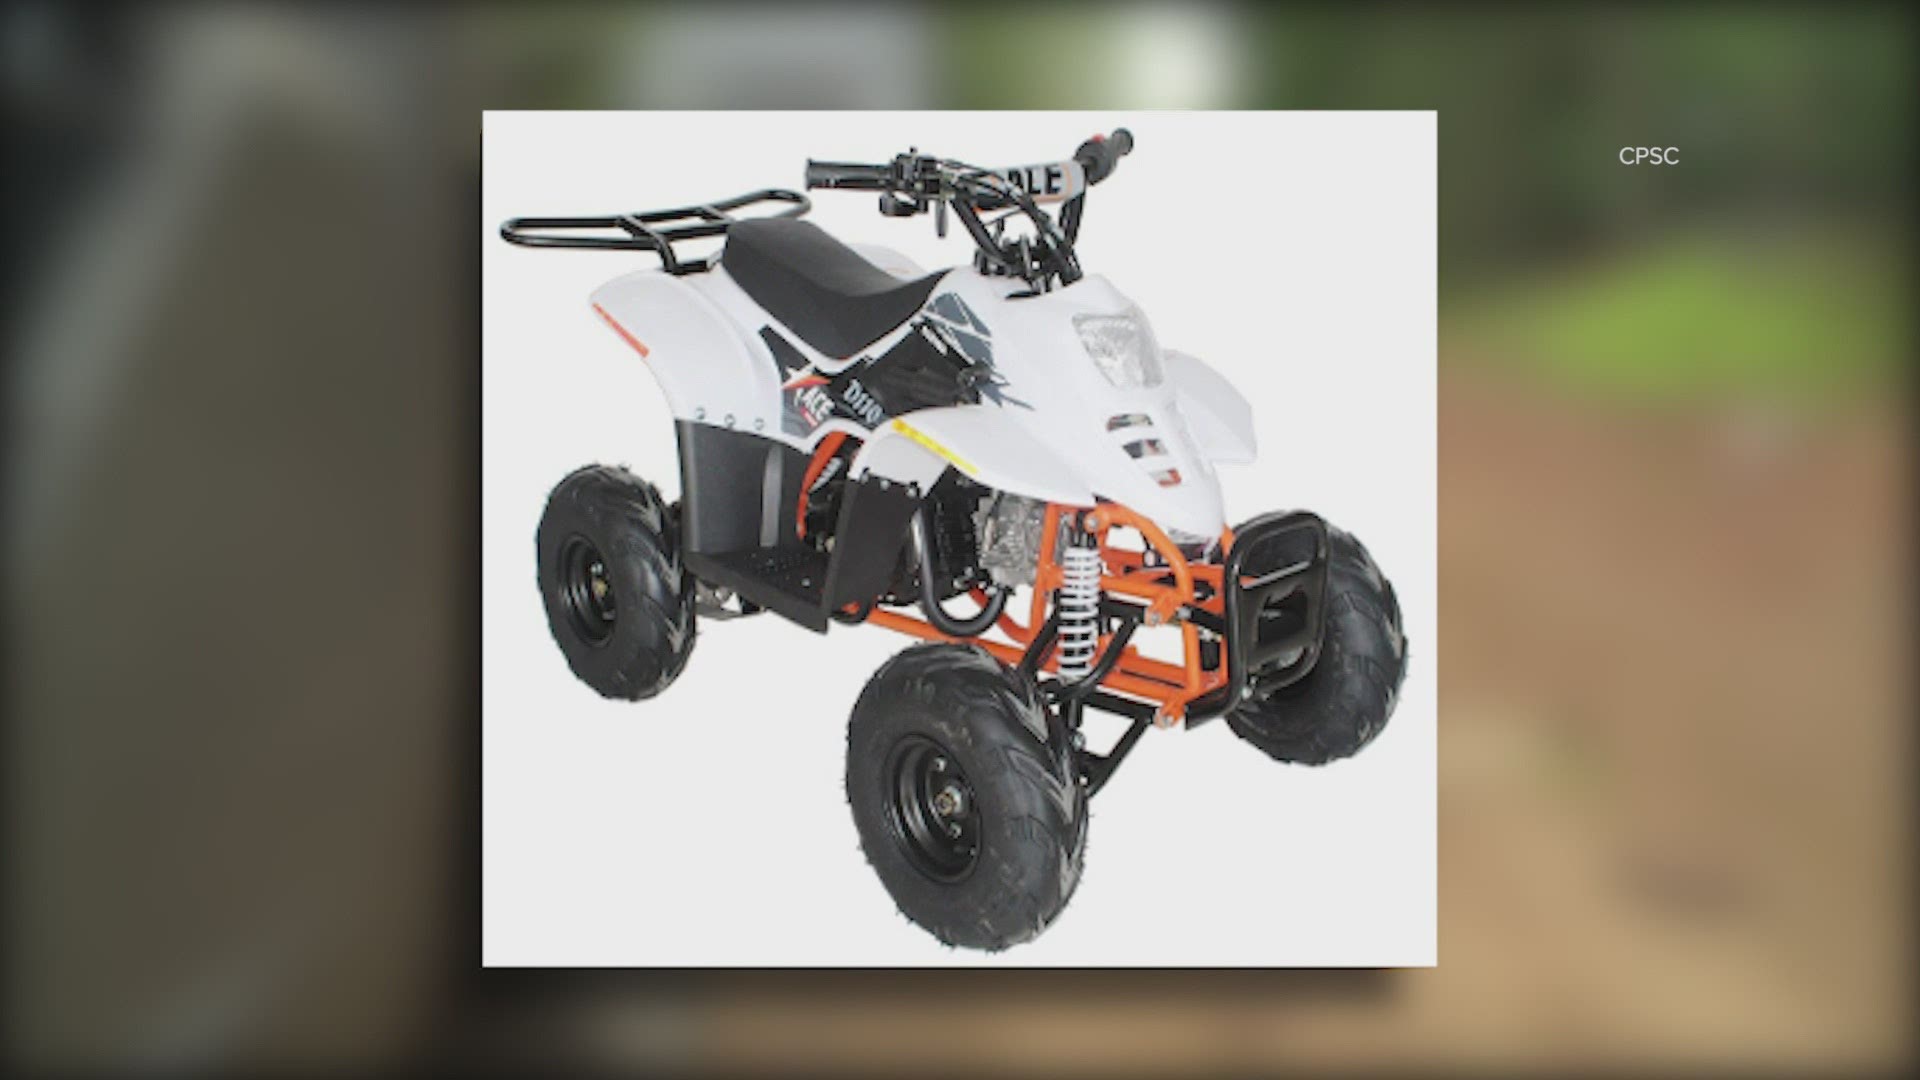 The Consumer Product Safety Commission, and EGL Motor, Inc., which makes the ATVs, say the ACE D110 youth ATV does not meet federal safety standards.